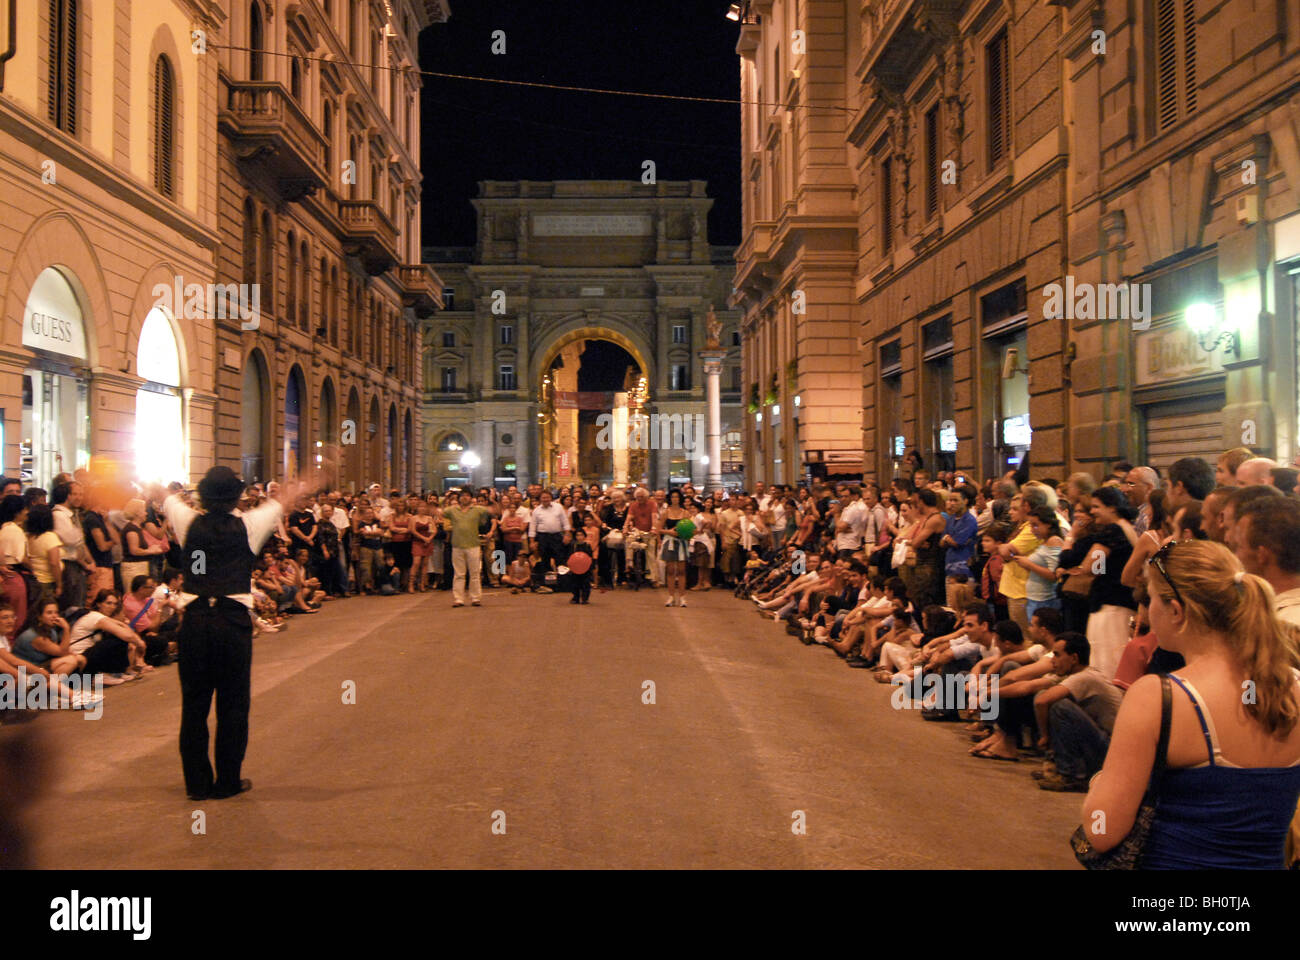 Street artists and spectators in the evening, Via d. Speziali, Florence, Tuscany, Italy, Europe Stock Photo